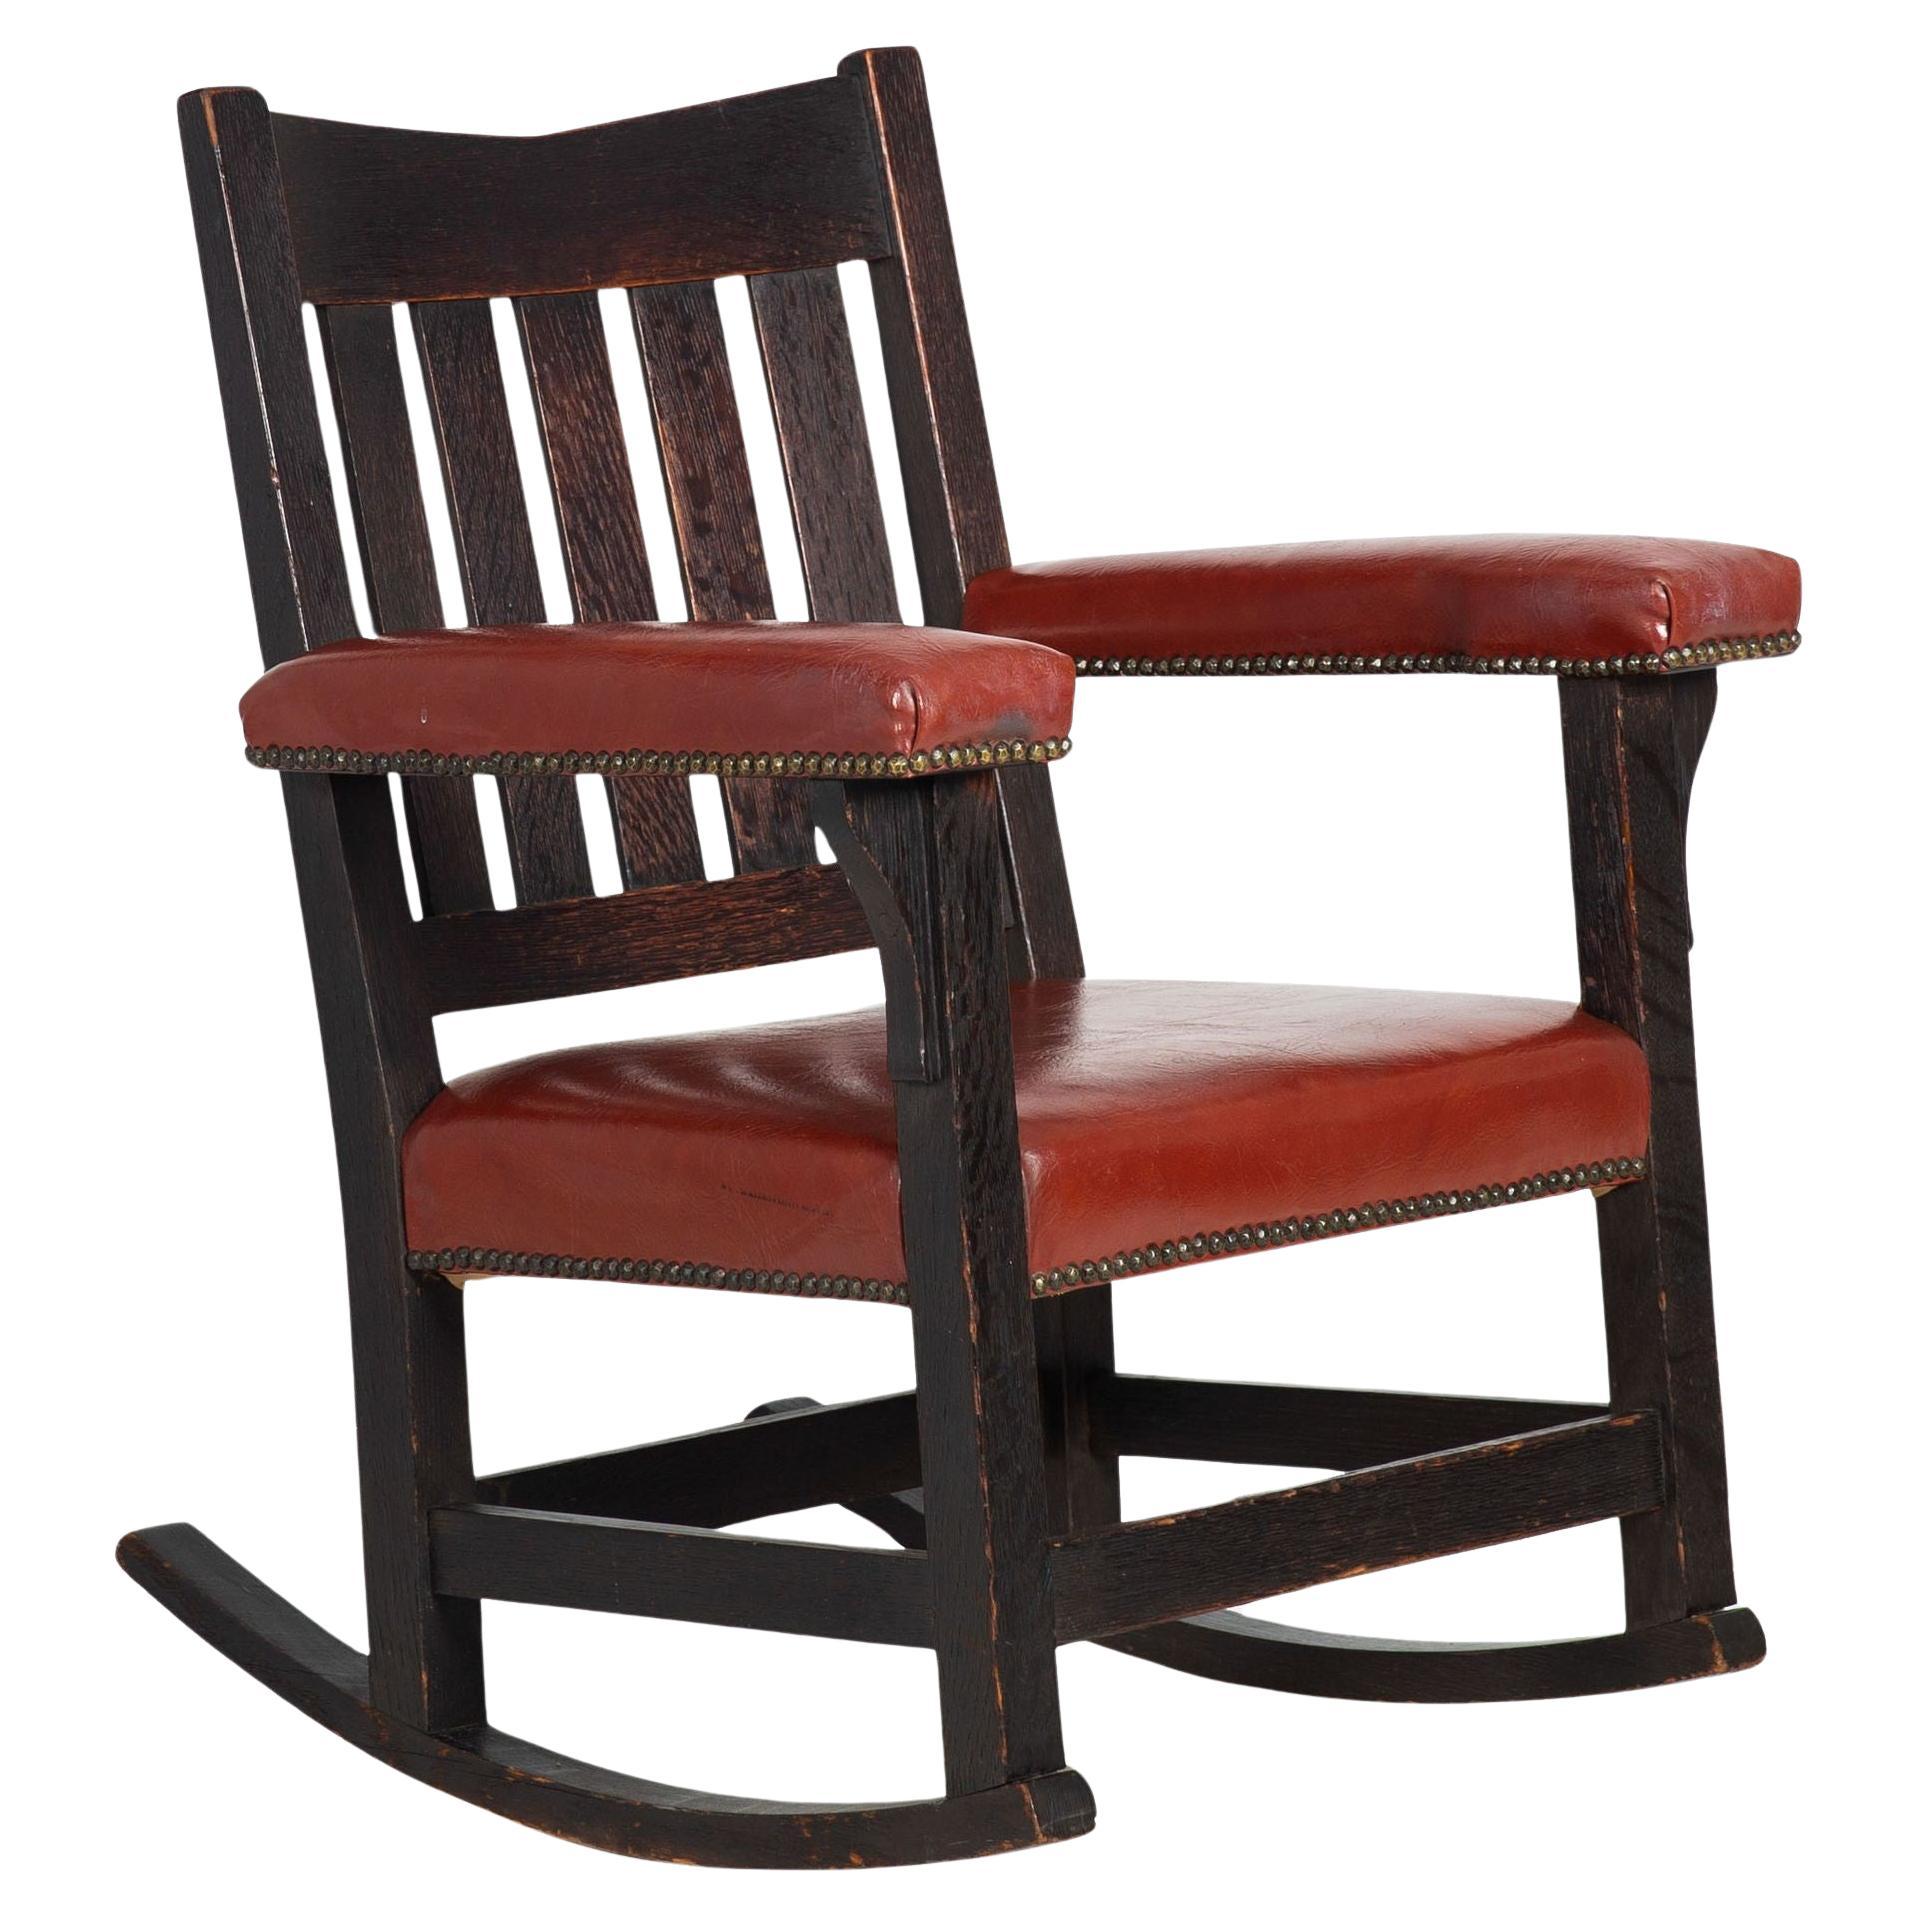 Arts & Crafts Fumed Oak Rocking Chair by Gustave Stickley, no. 311 1/2